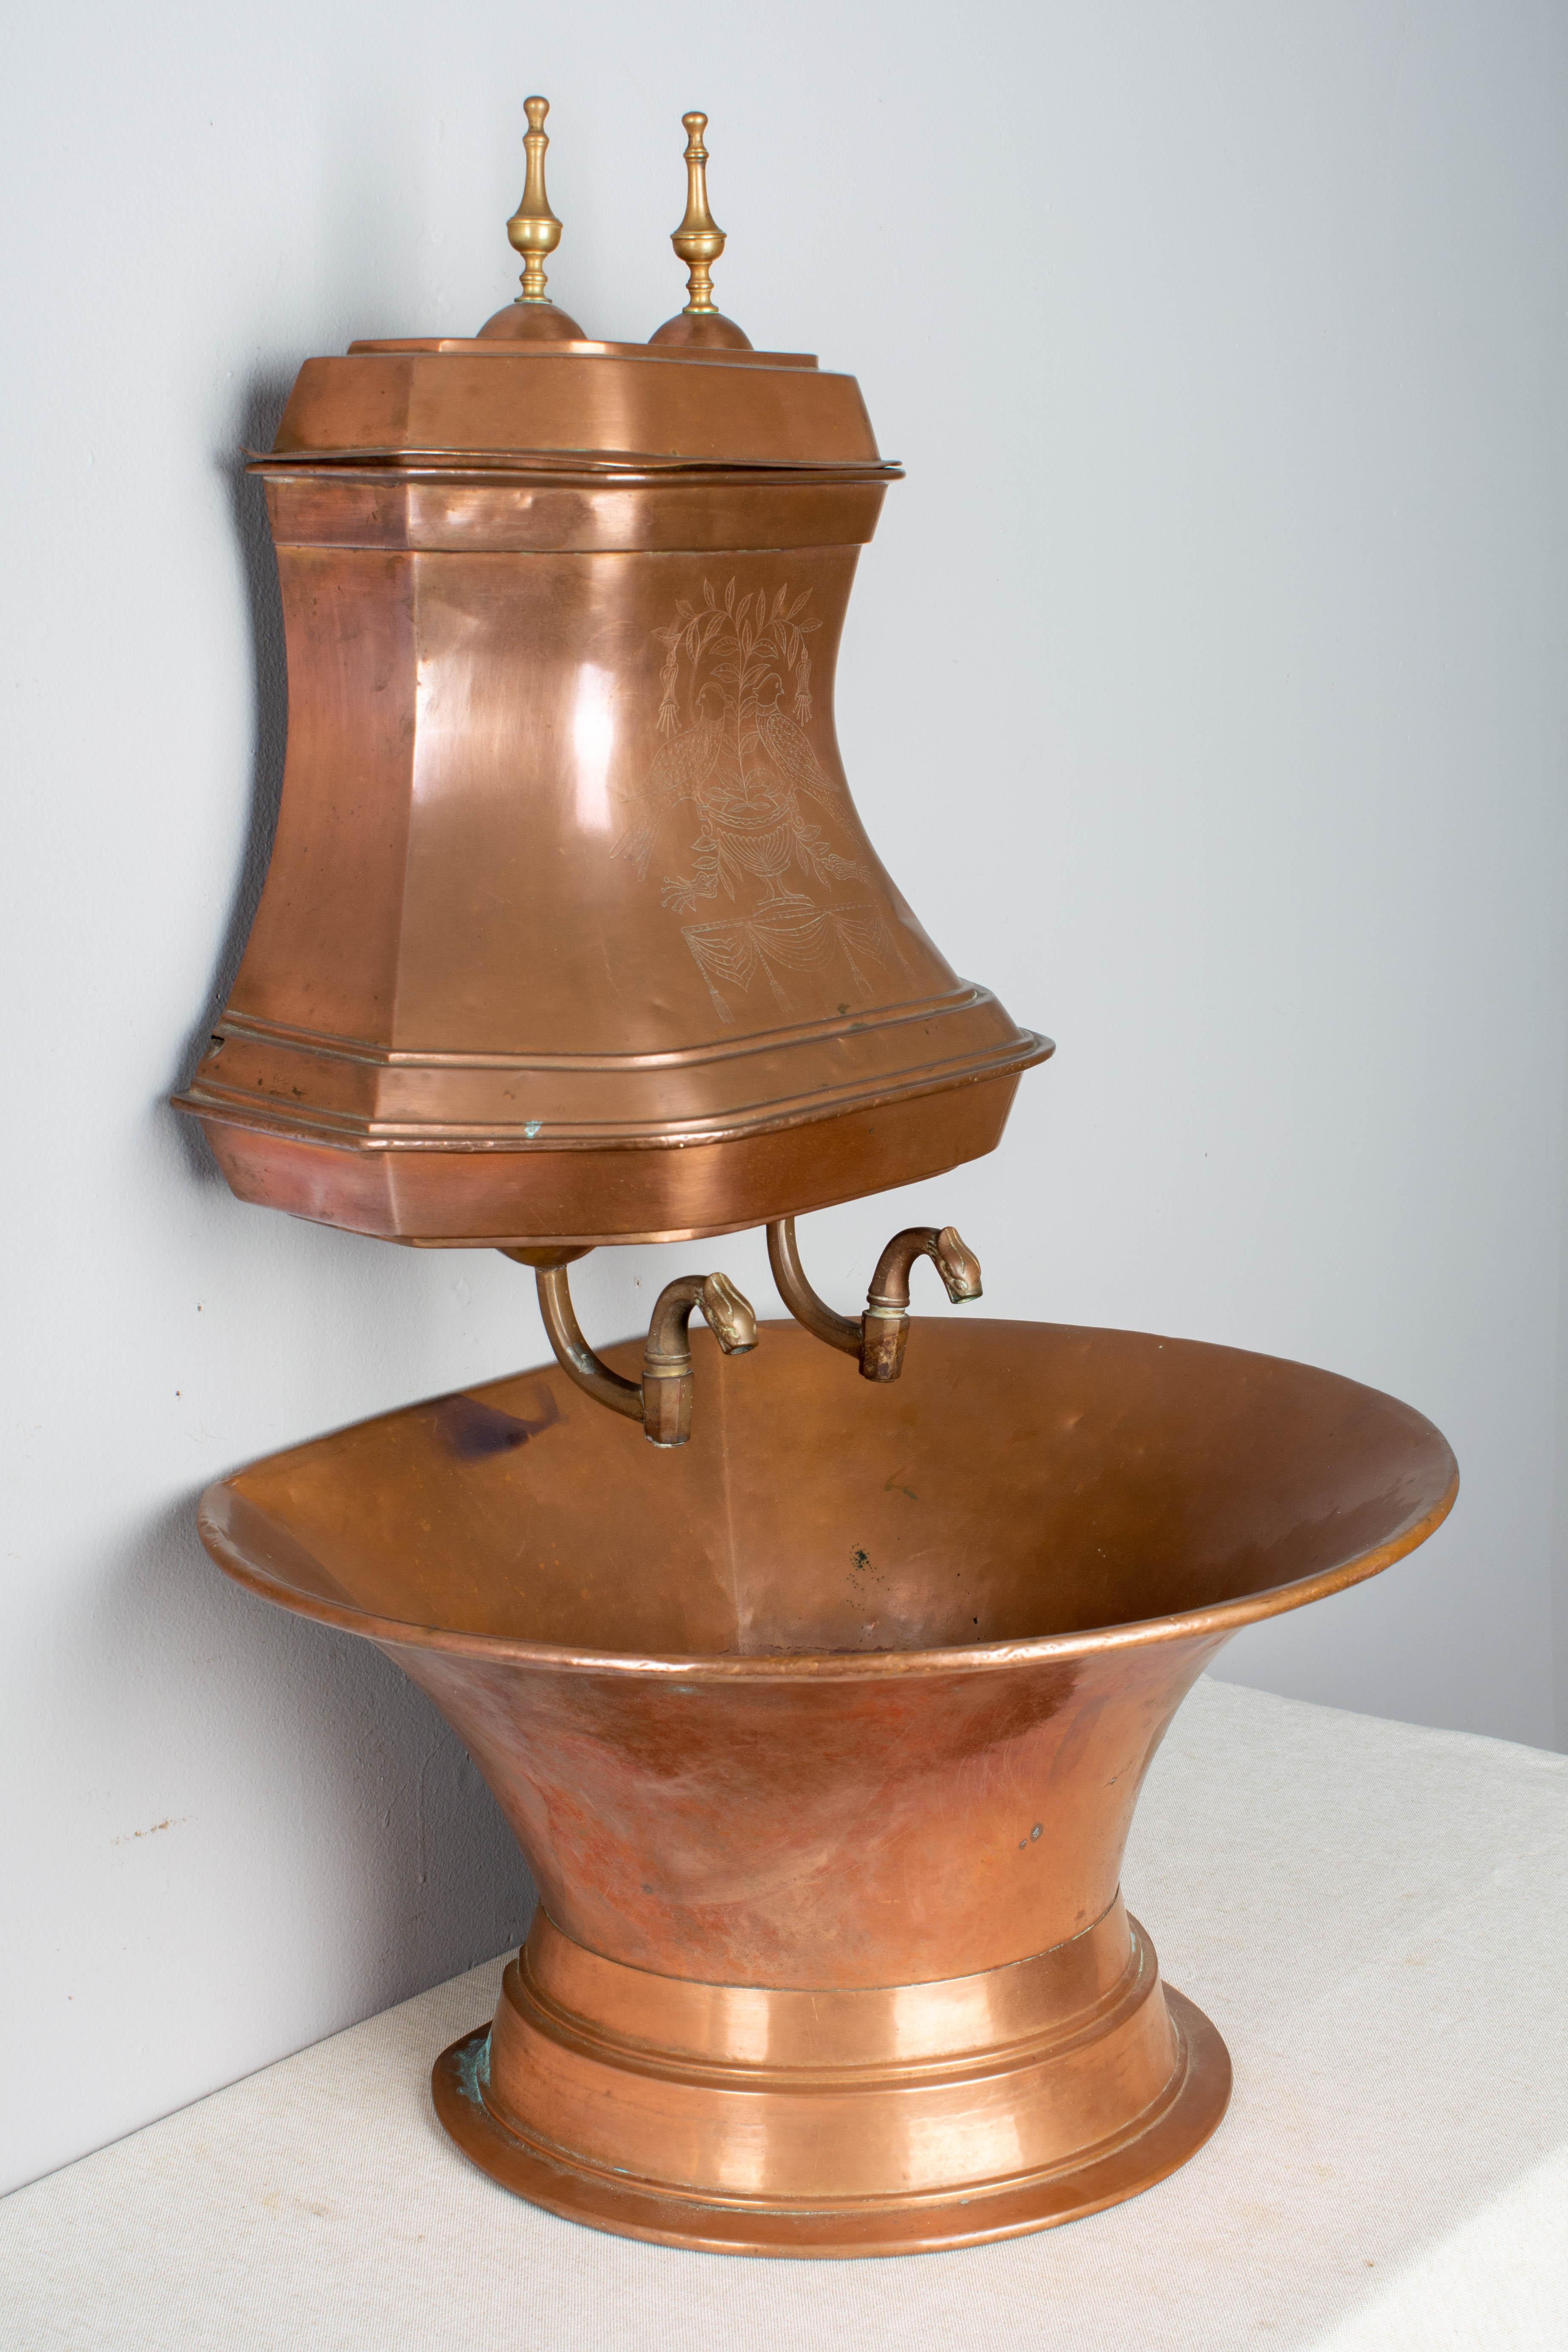 A French copper lavabo, or water reservoir with large basin. The tank has a repoussé decoration of birds and stylized flowers on the front and cast brass finials on the lid. The two cast brass water taps allow the water to empty into the large basin